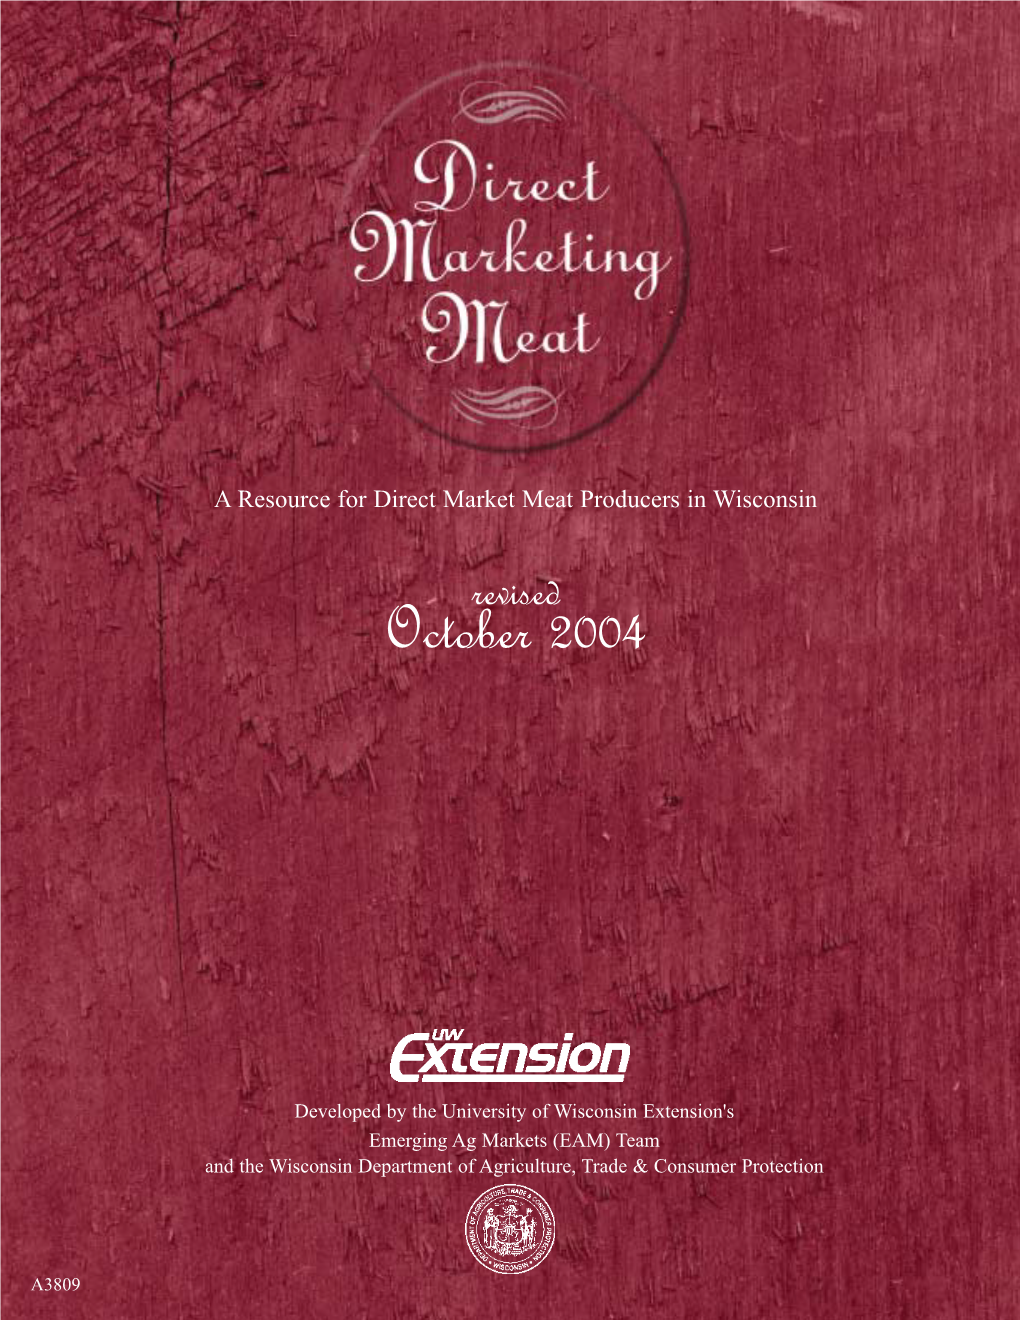 Direct Marketing Meat and Poultry